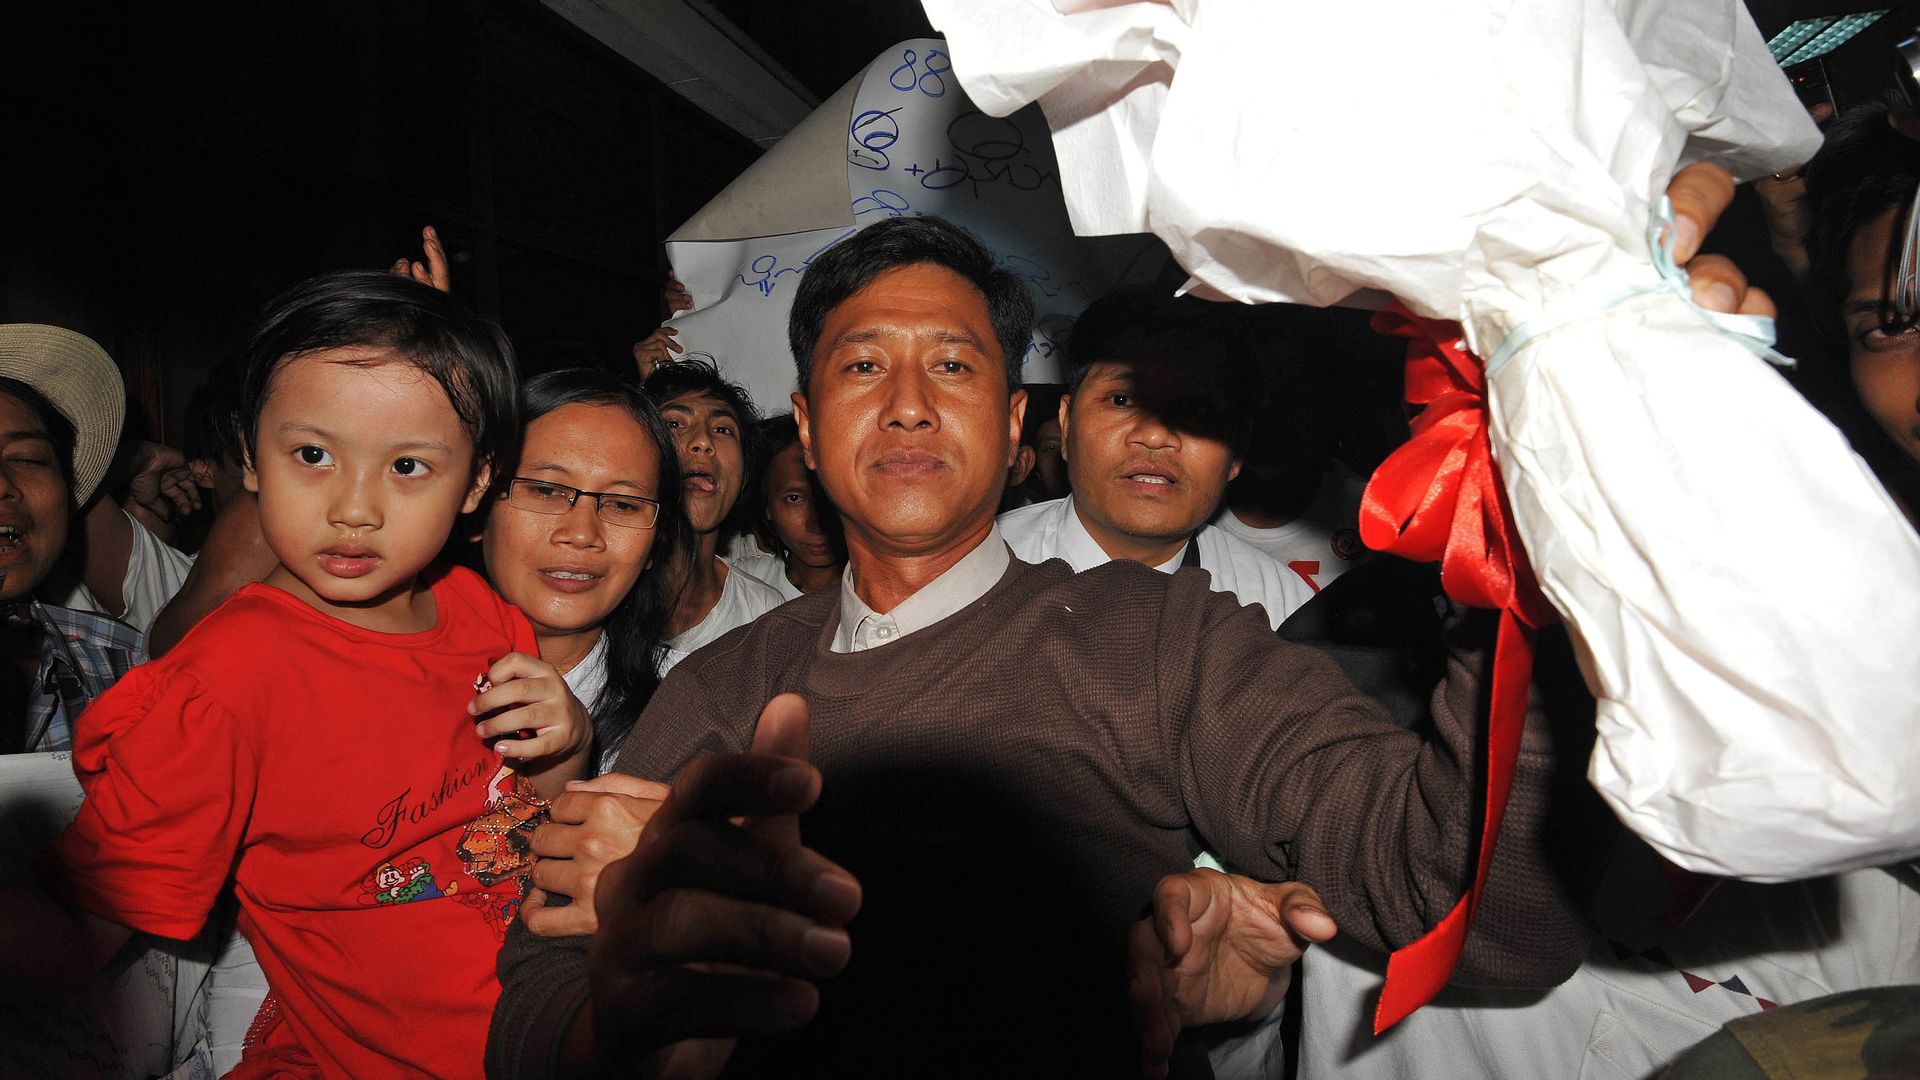 Myanmar political prisoner Kyaw Min Yu (C), known as Jimmy, and his wife holding her child upon their arrival at Yangon airport following their release from detention on January 13, 2012. 